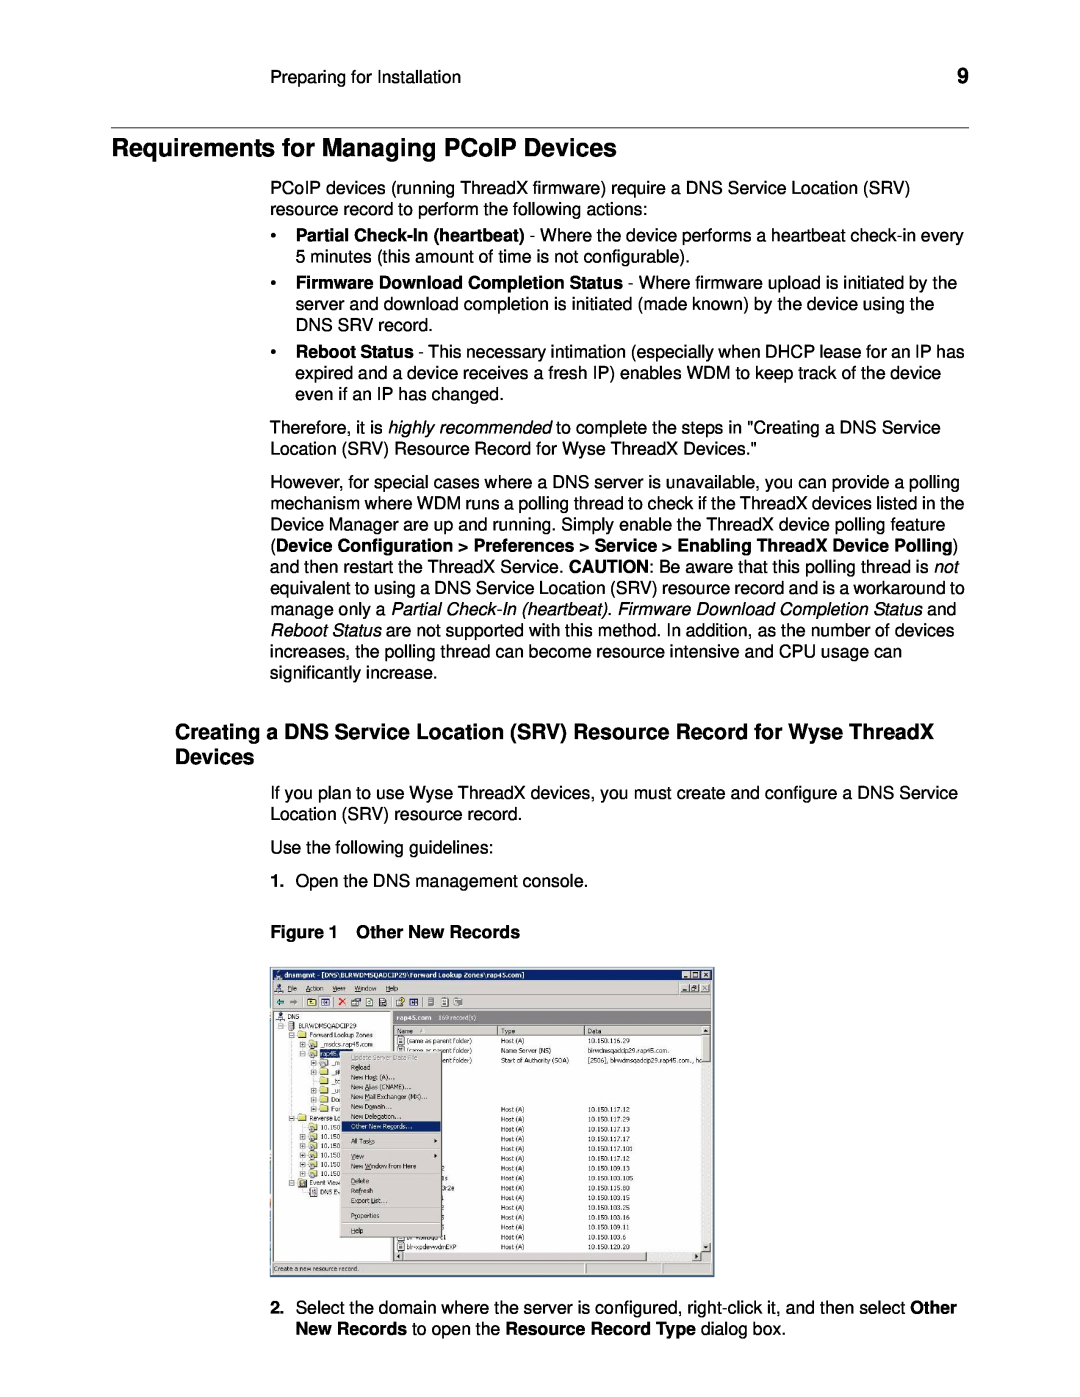 Wyse Technology 883886-01 manual Requirements for Managing PCoIP Devices, Other New Records 